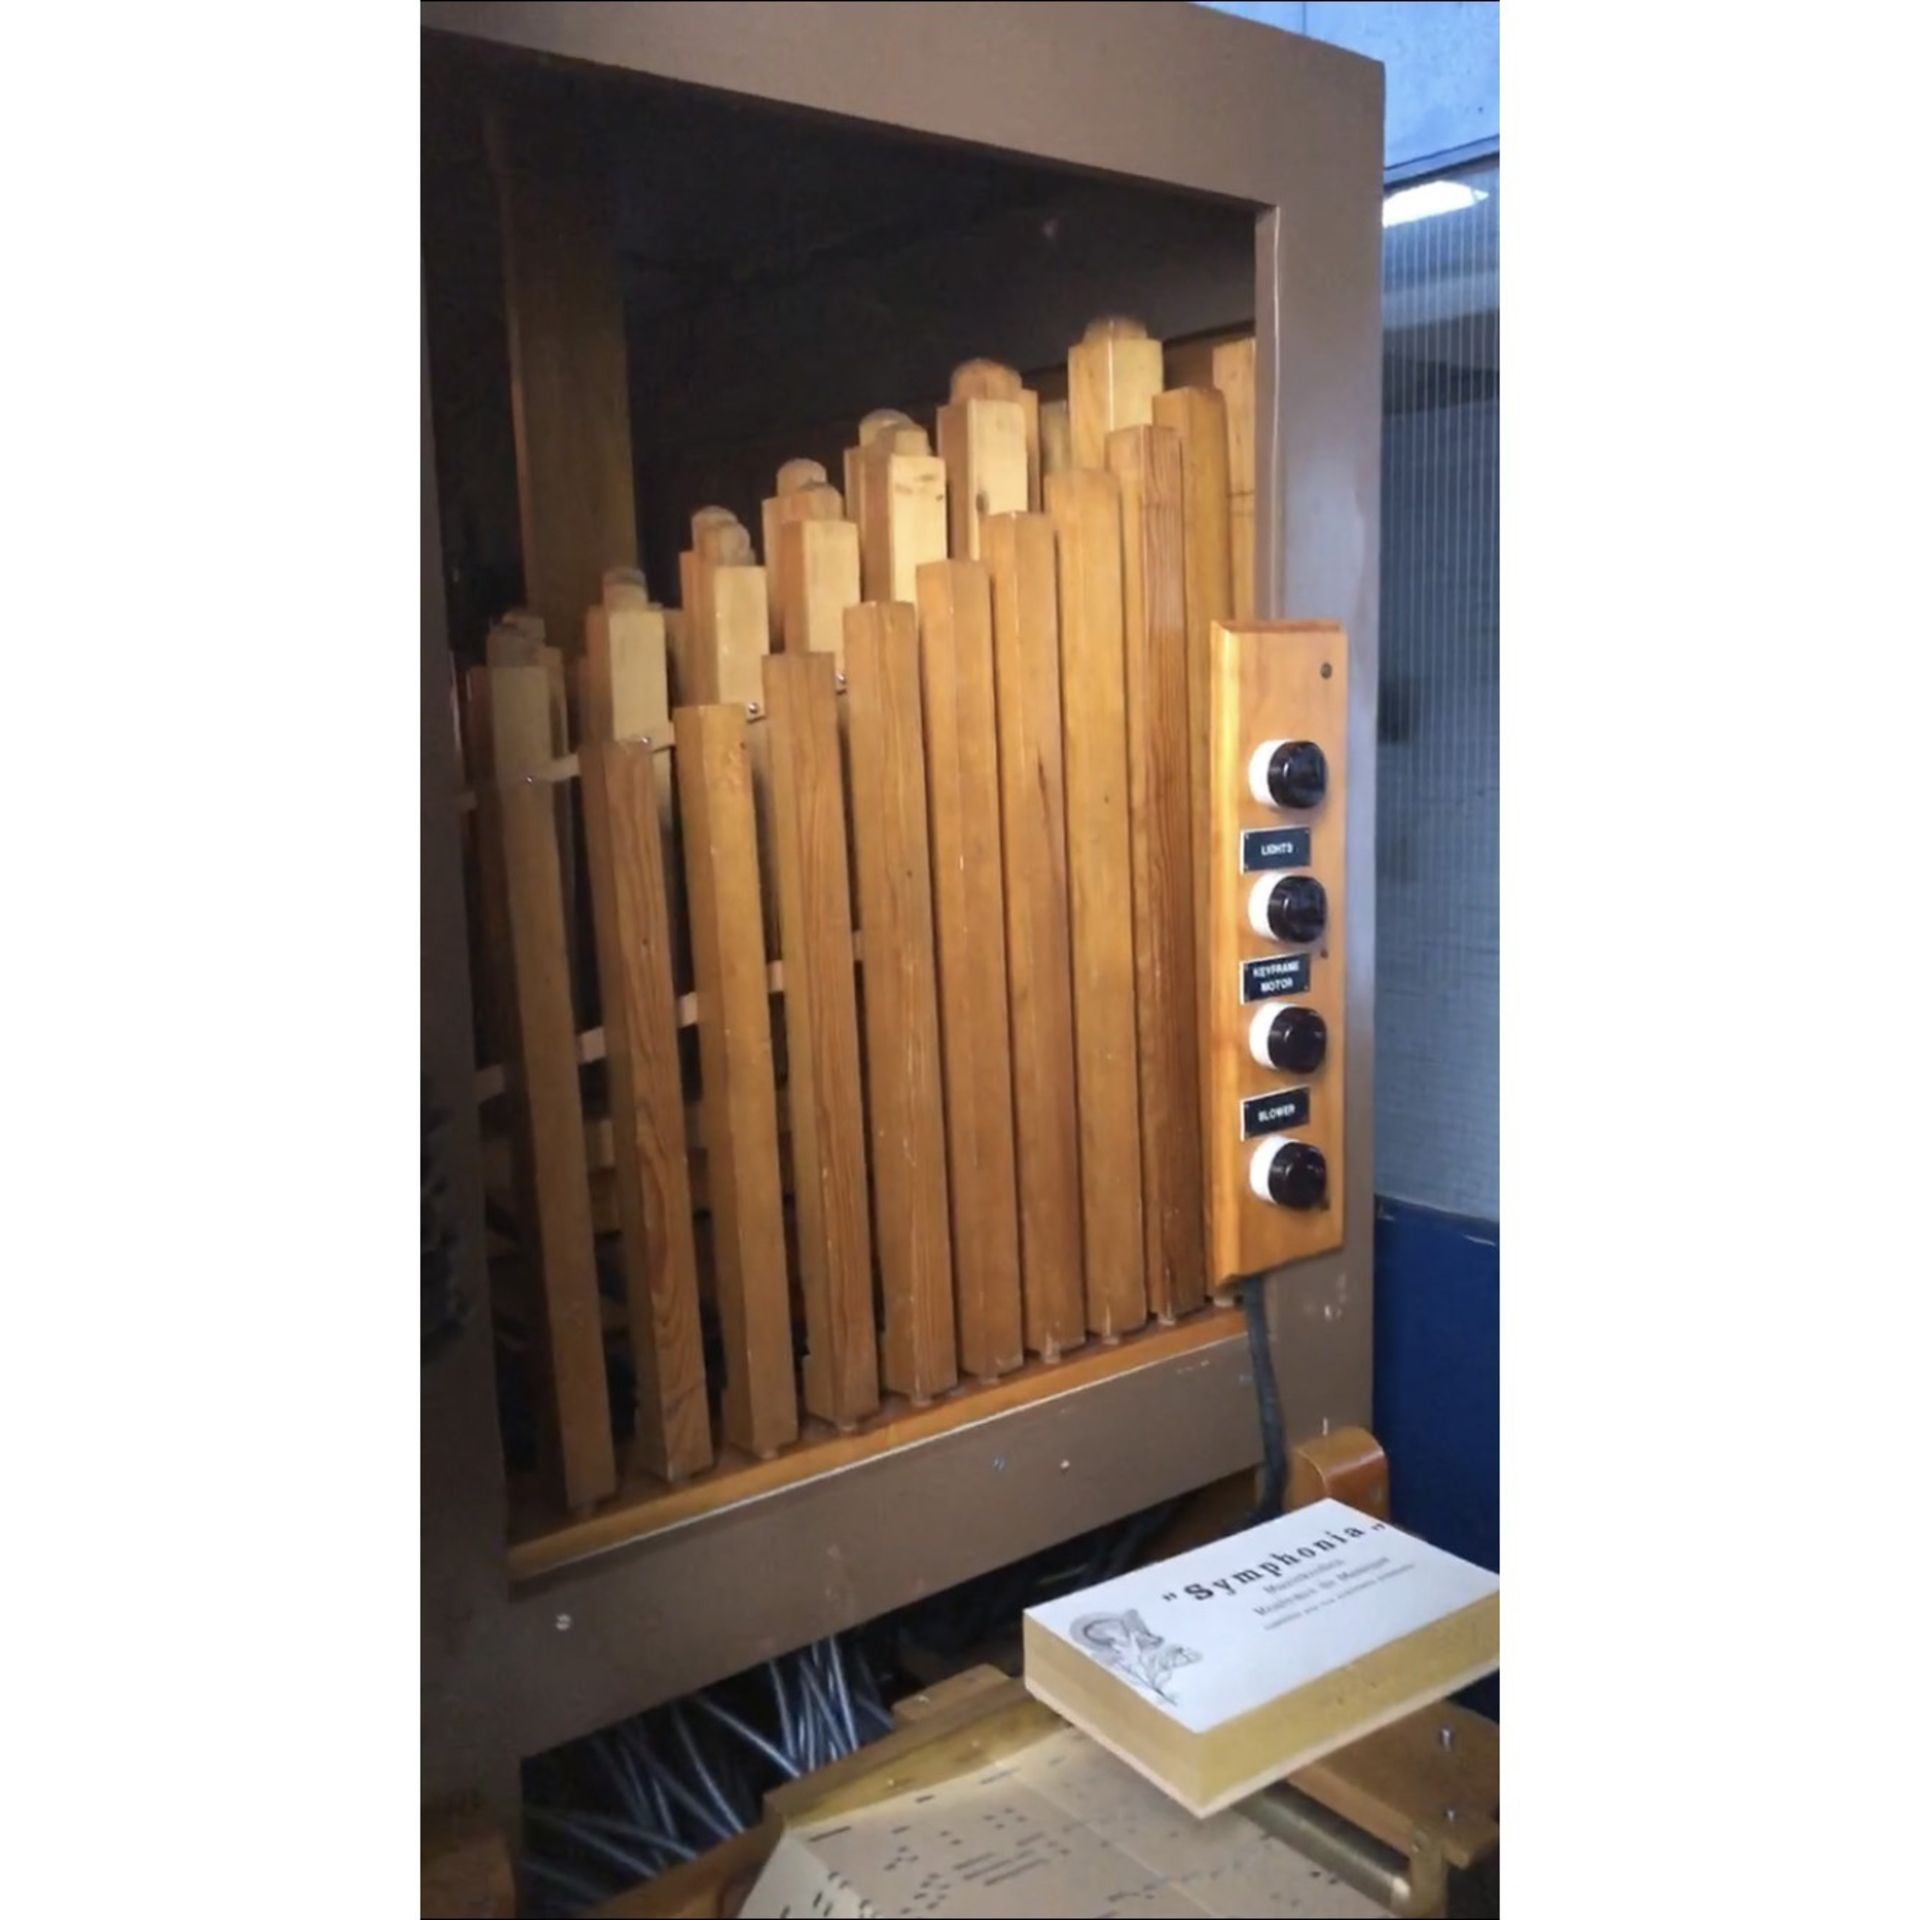 Decap 72-key Dance Organ with 50 Music Books - Image 3 of 6